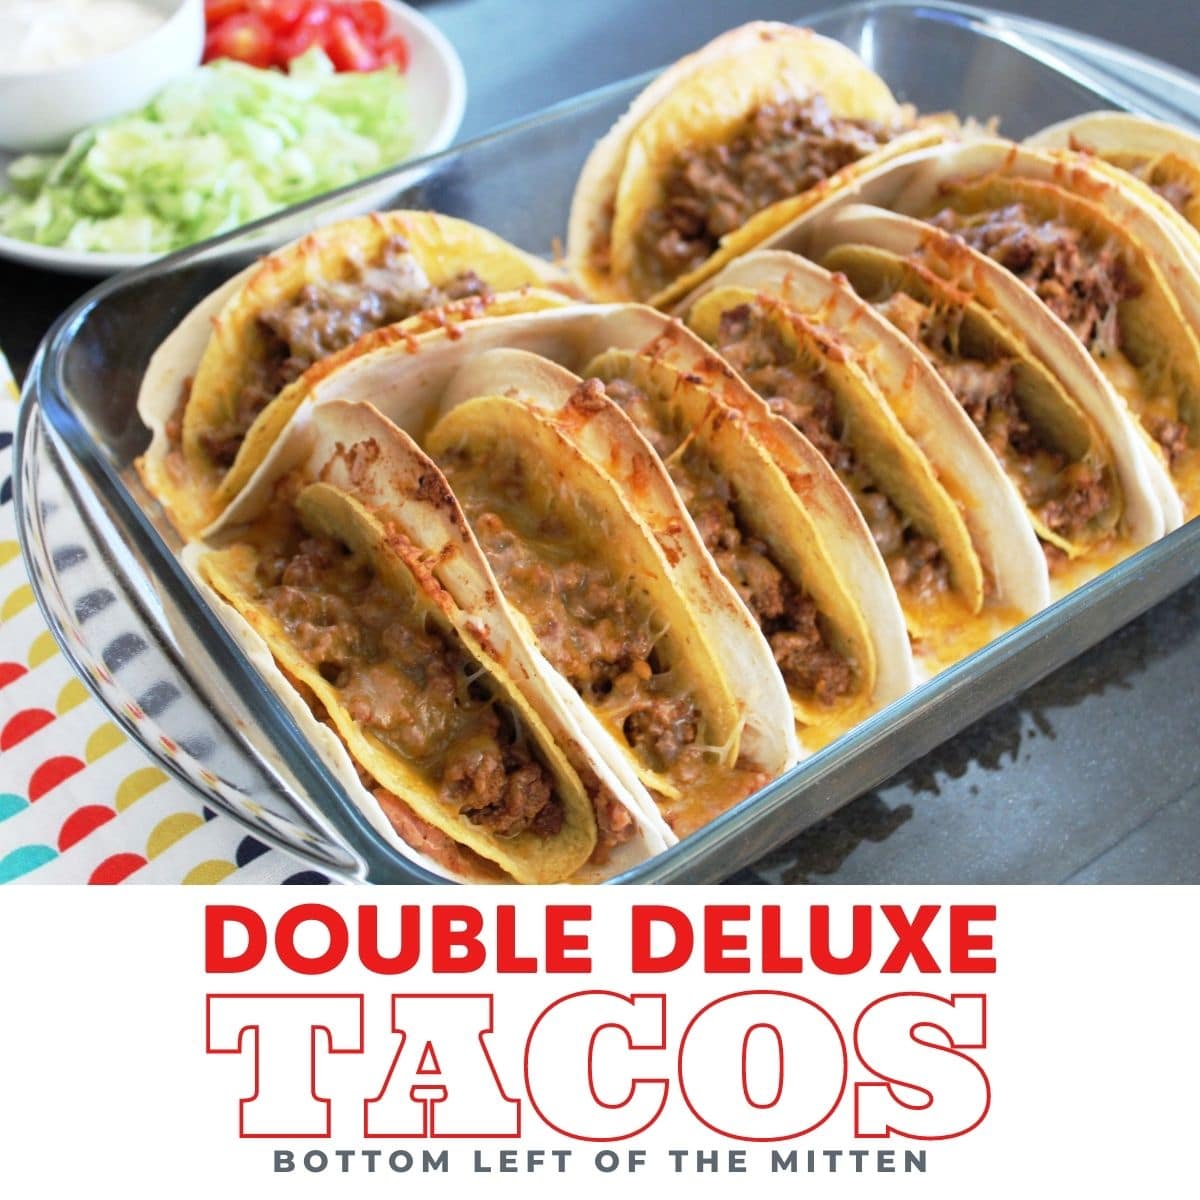 collage image of double deluxe tacos with descriptive text